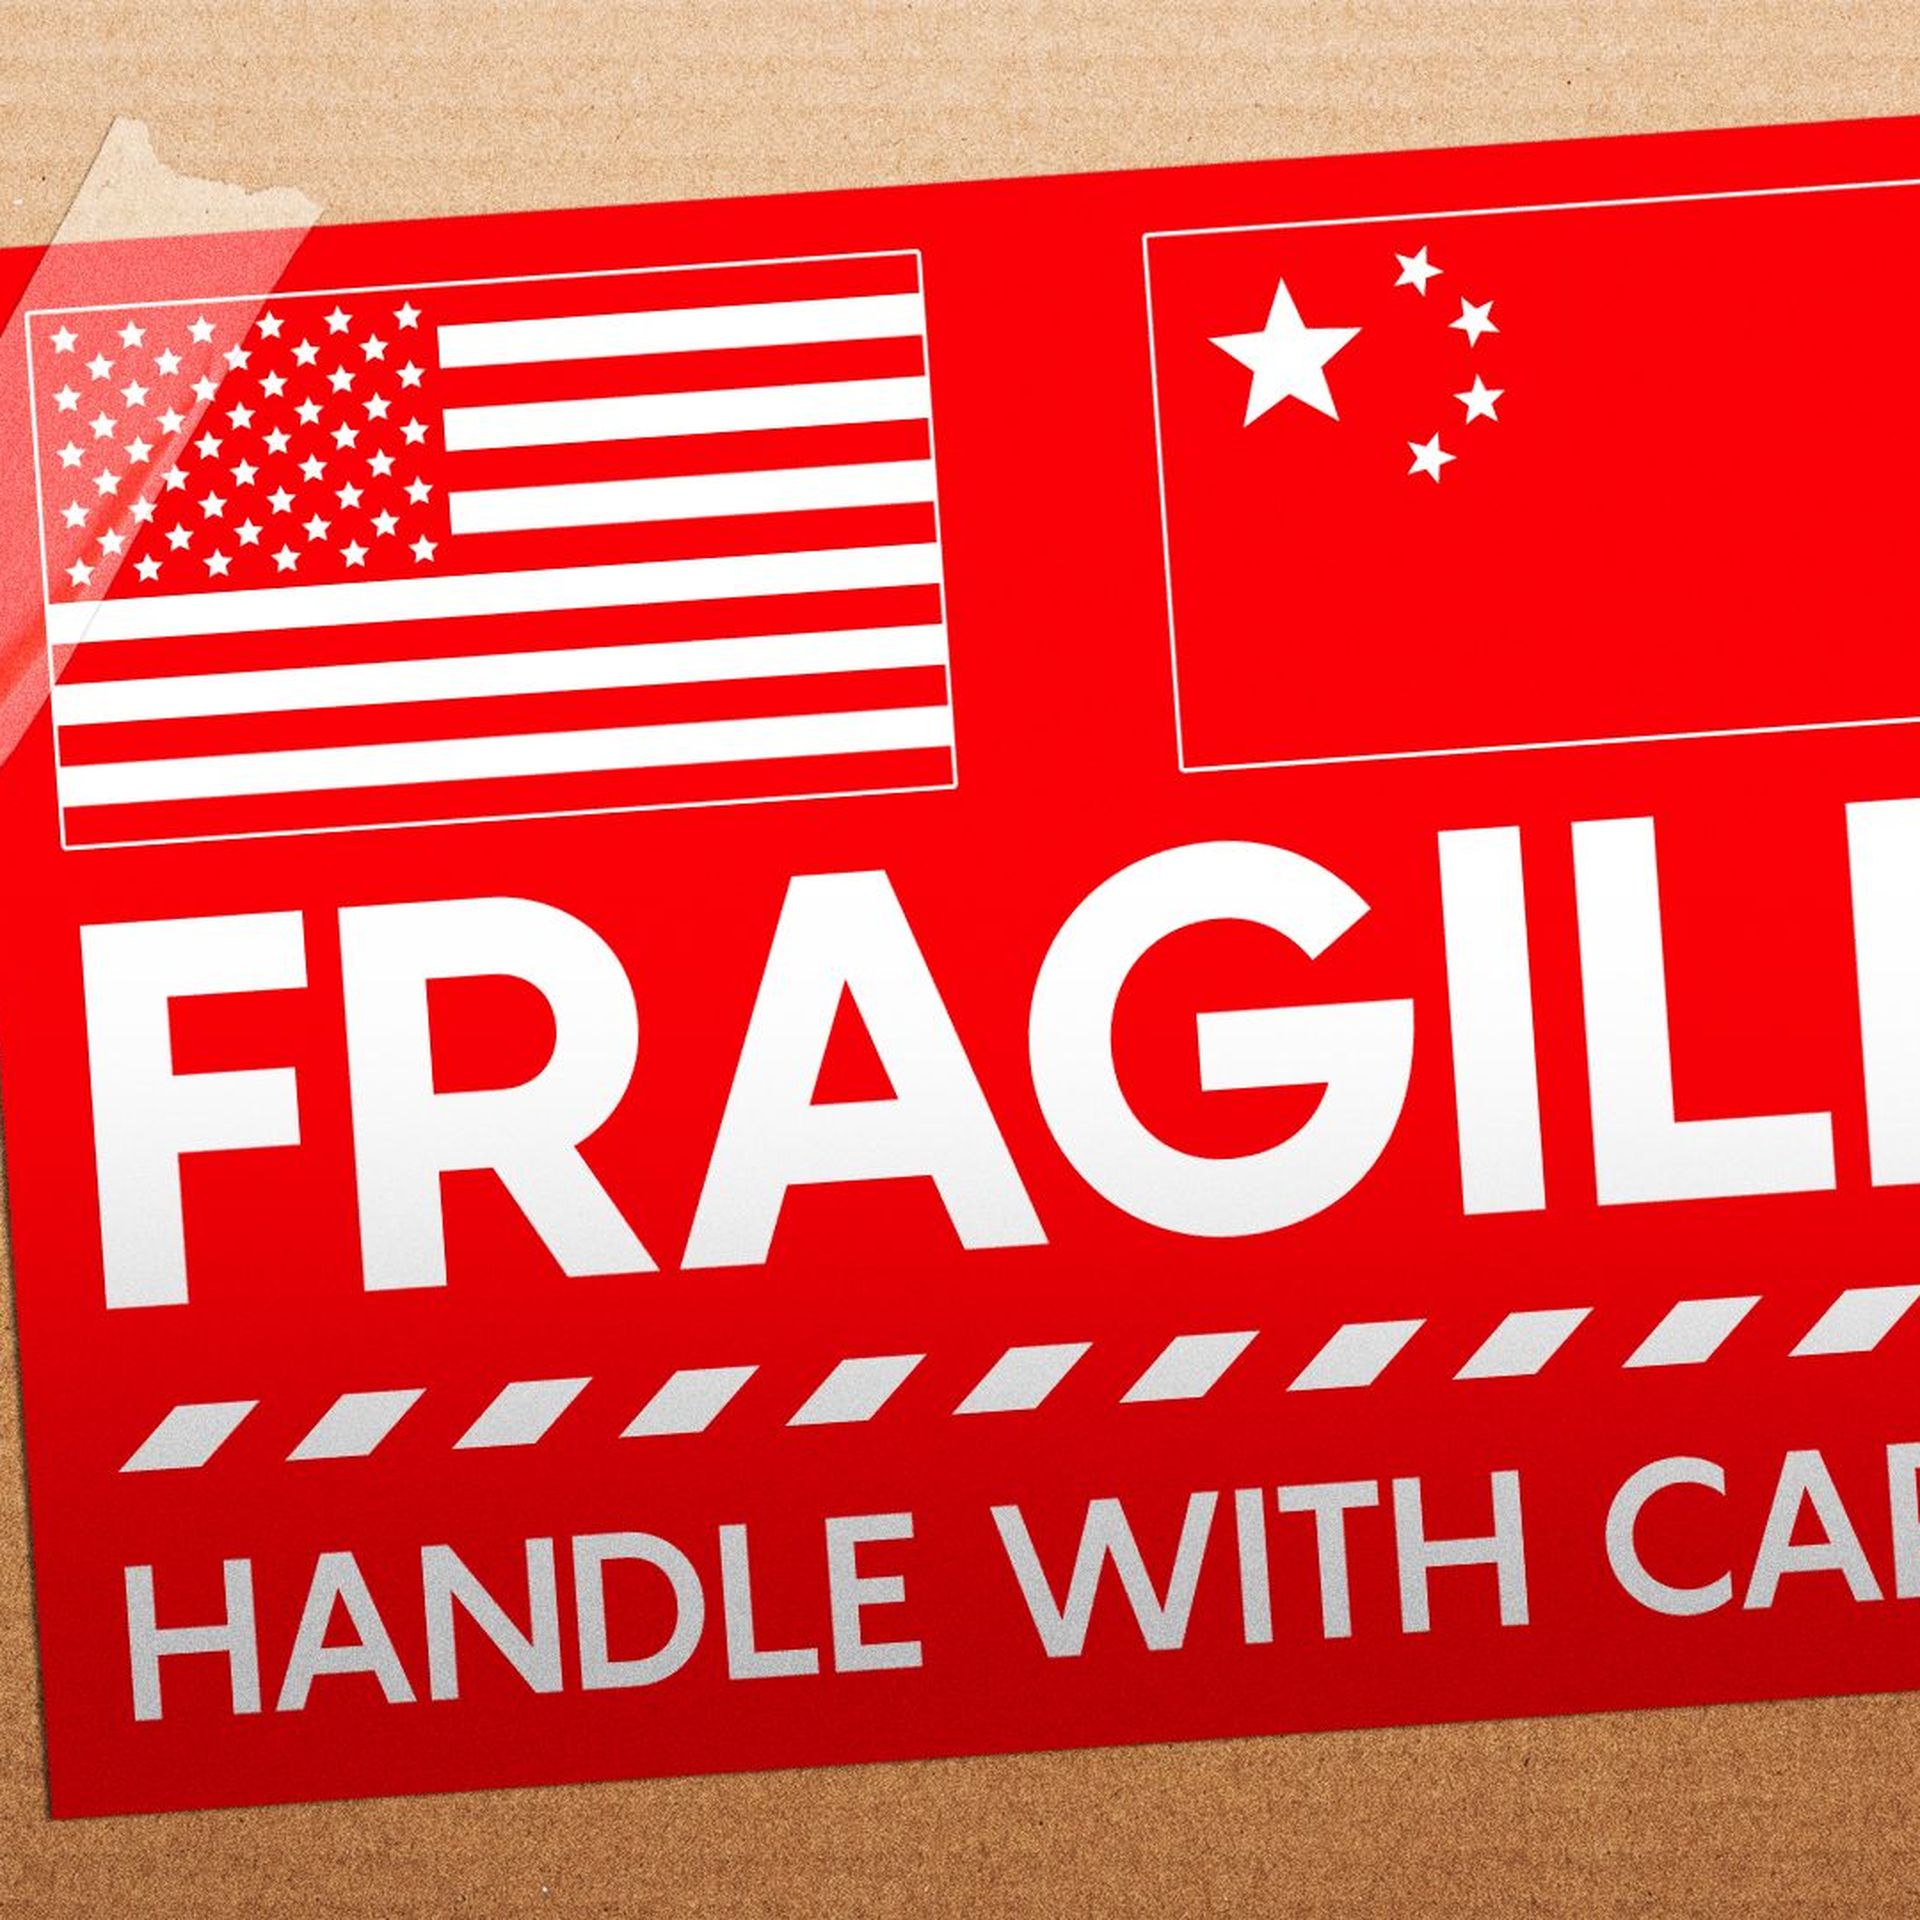 Illustration of a "fragile" sticker on a cardboard box showing the US and China flags. 